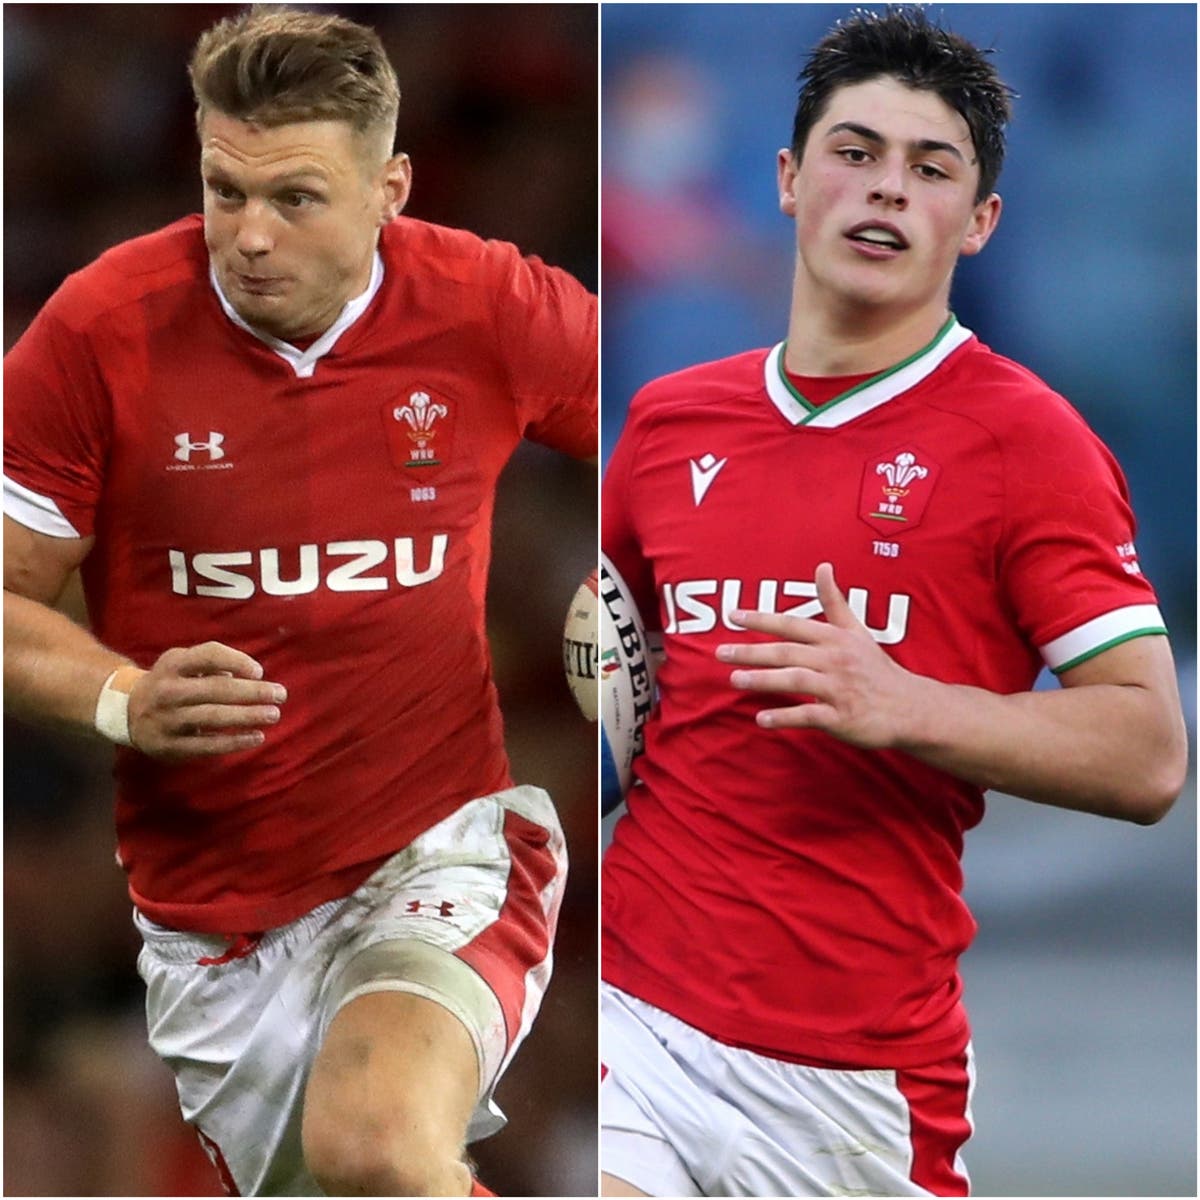 Dan Biggar and Louis Rees-Zammit set to boost Wales ahead of South Africa match